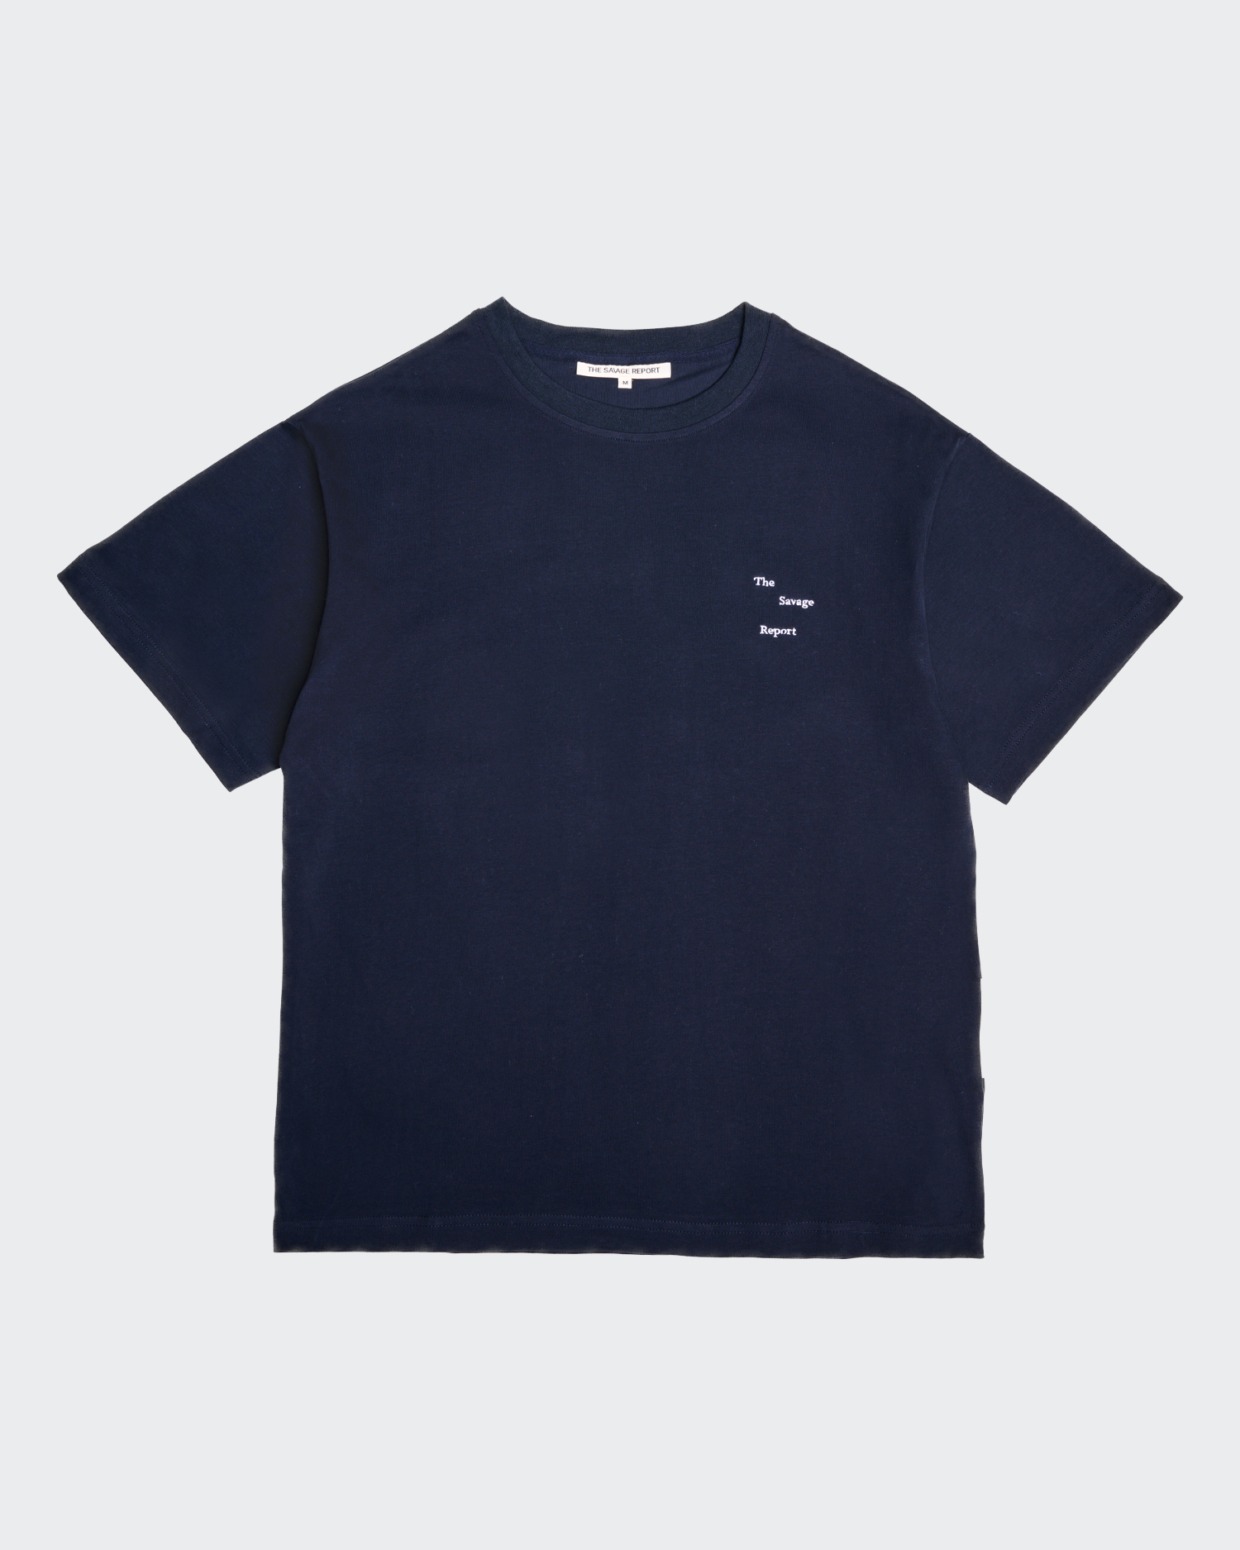 The Savage Report Wave Logo T-Shirt